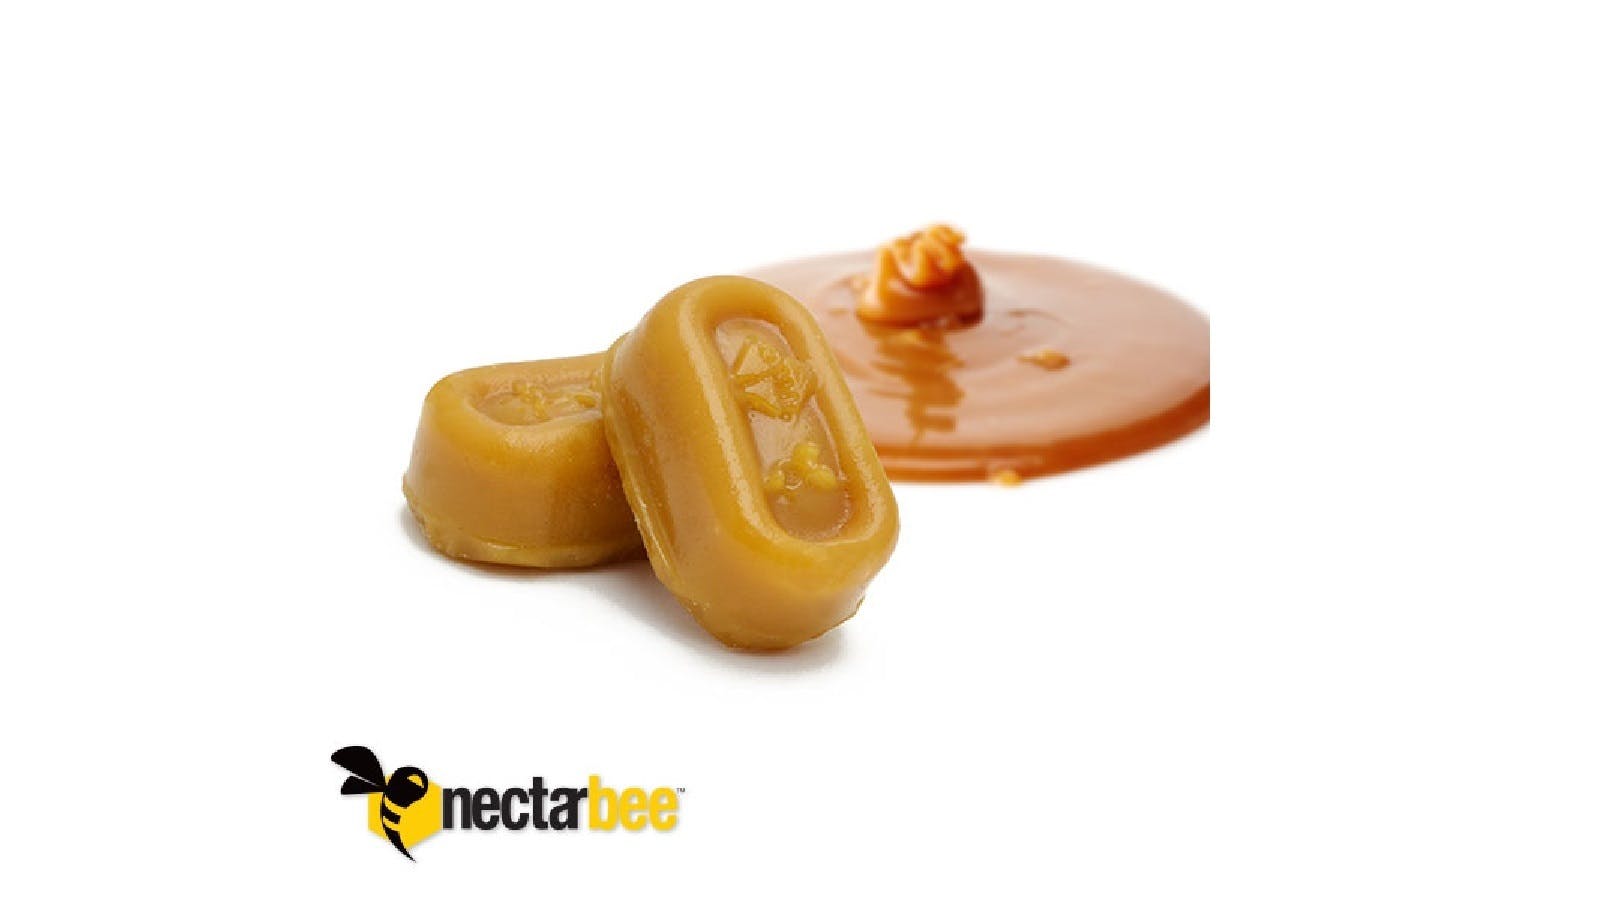 edible-nectarbee-butterscotch-lozenges